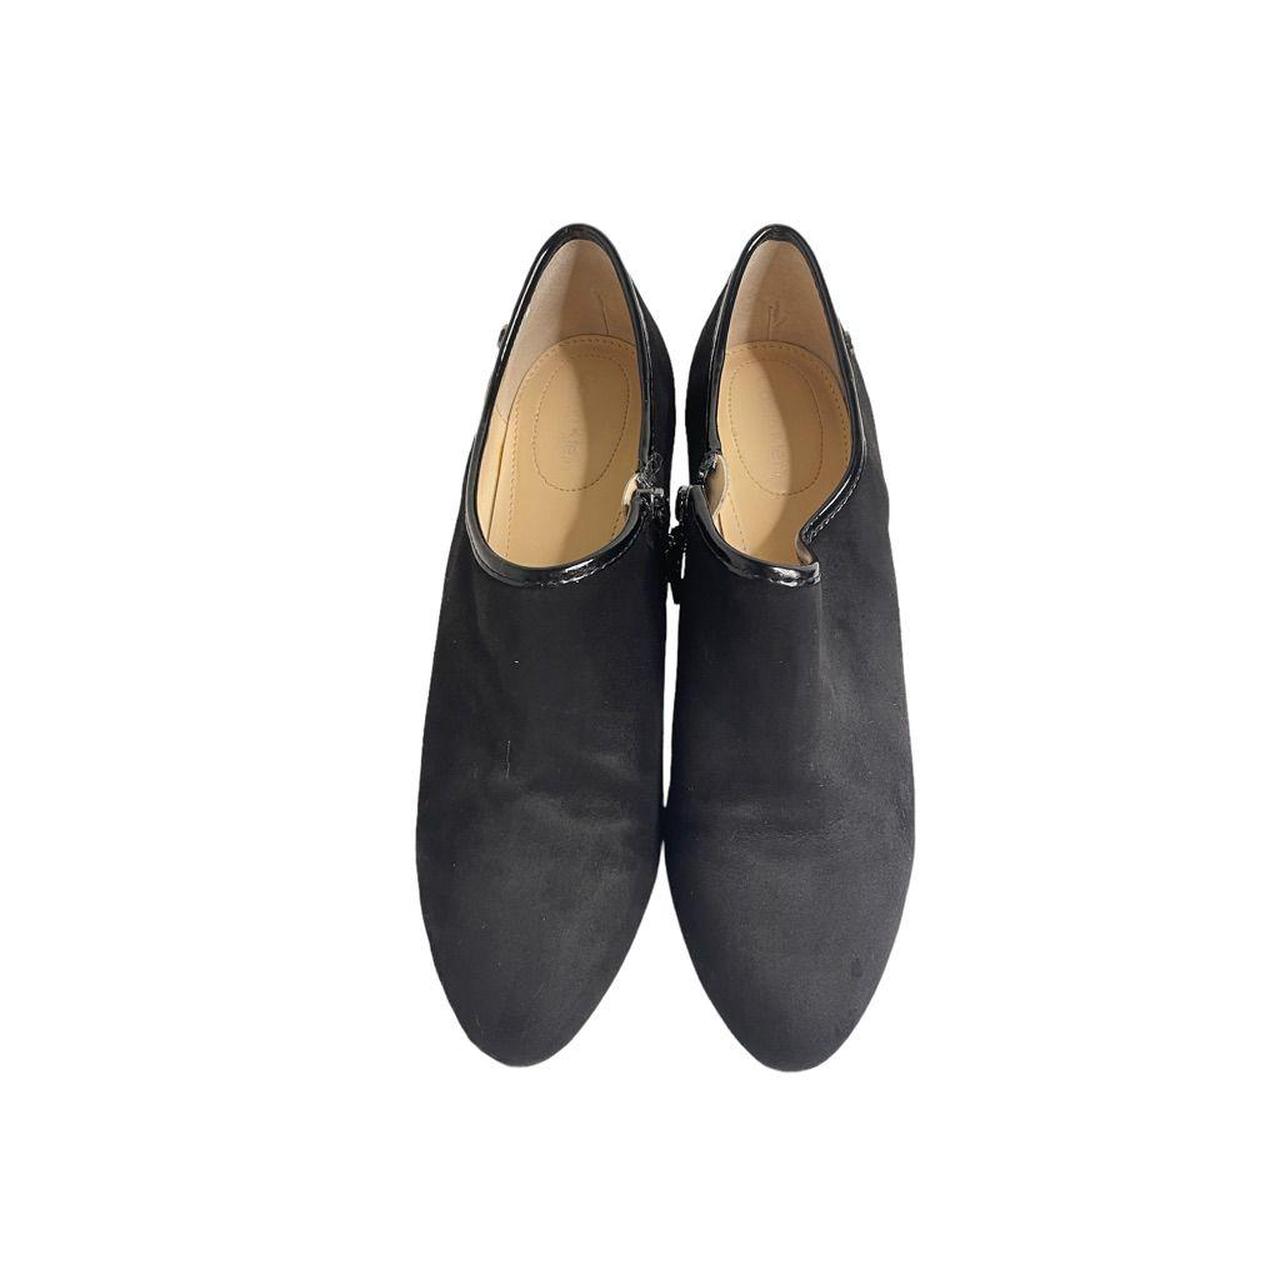 Product Image 2 - Calvin Klein Womens Black Suede